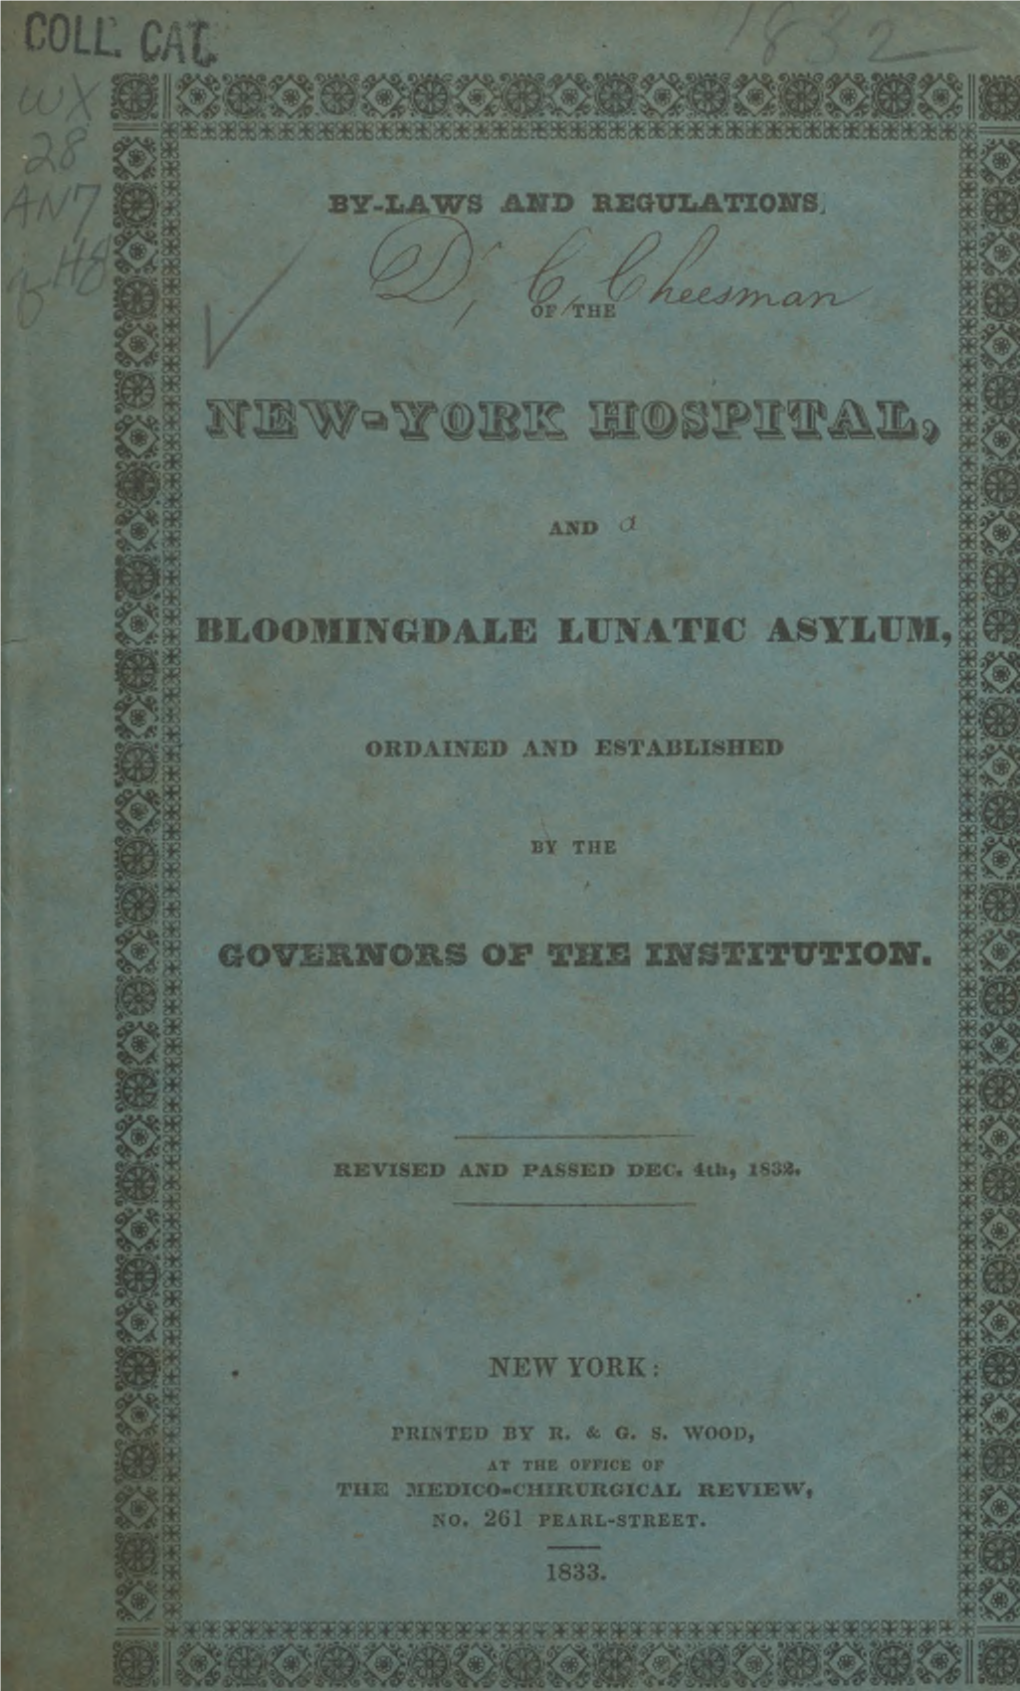 By-Laws and Regulations of the New-York Hospital And